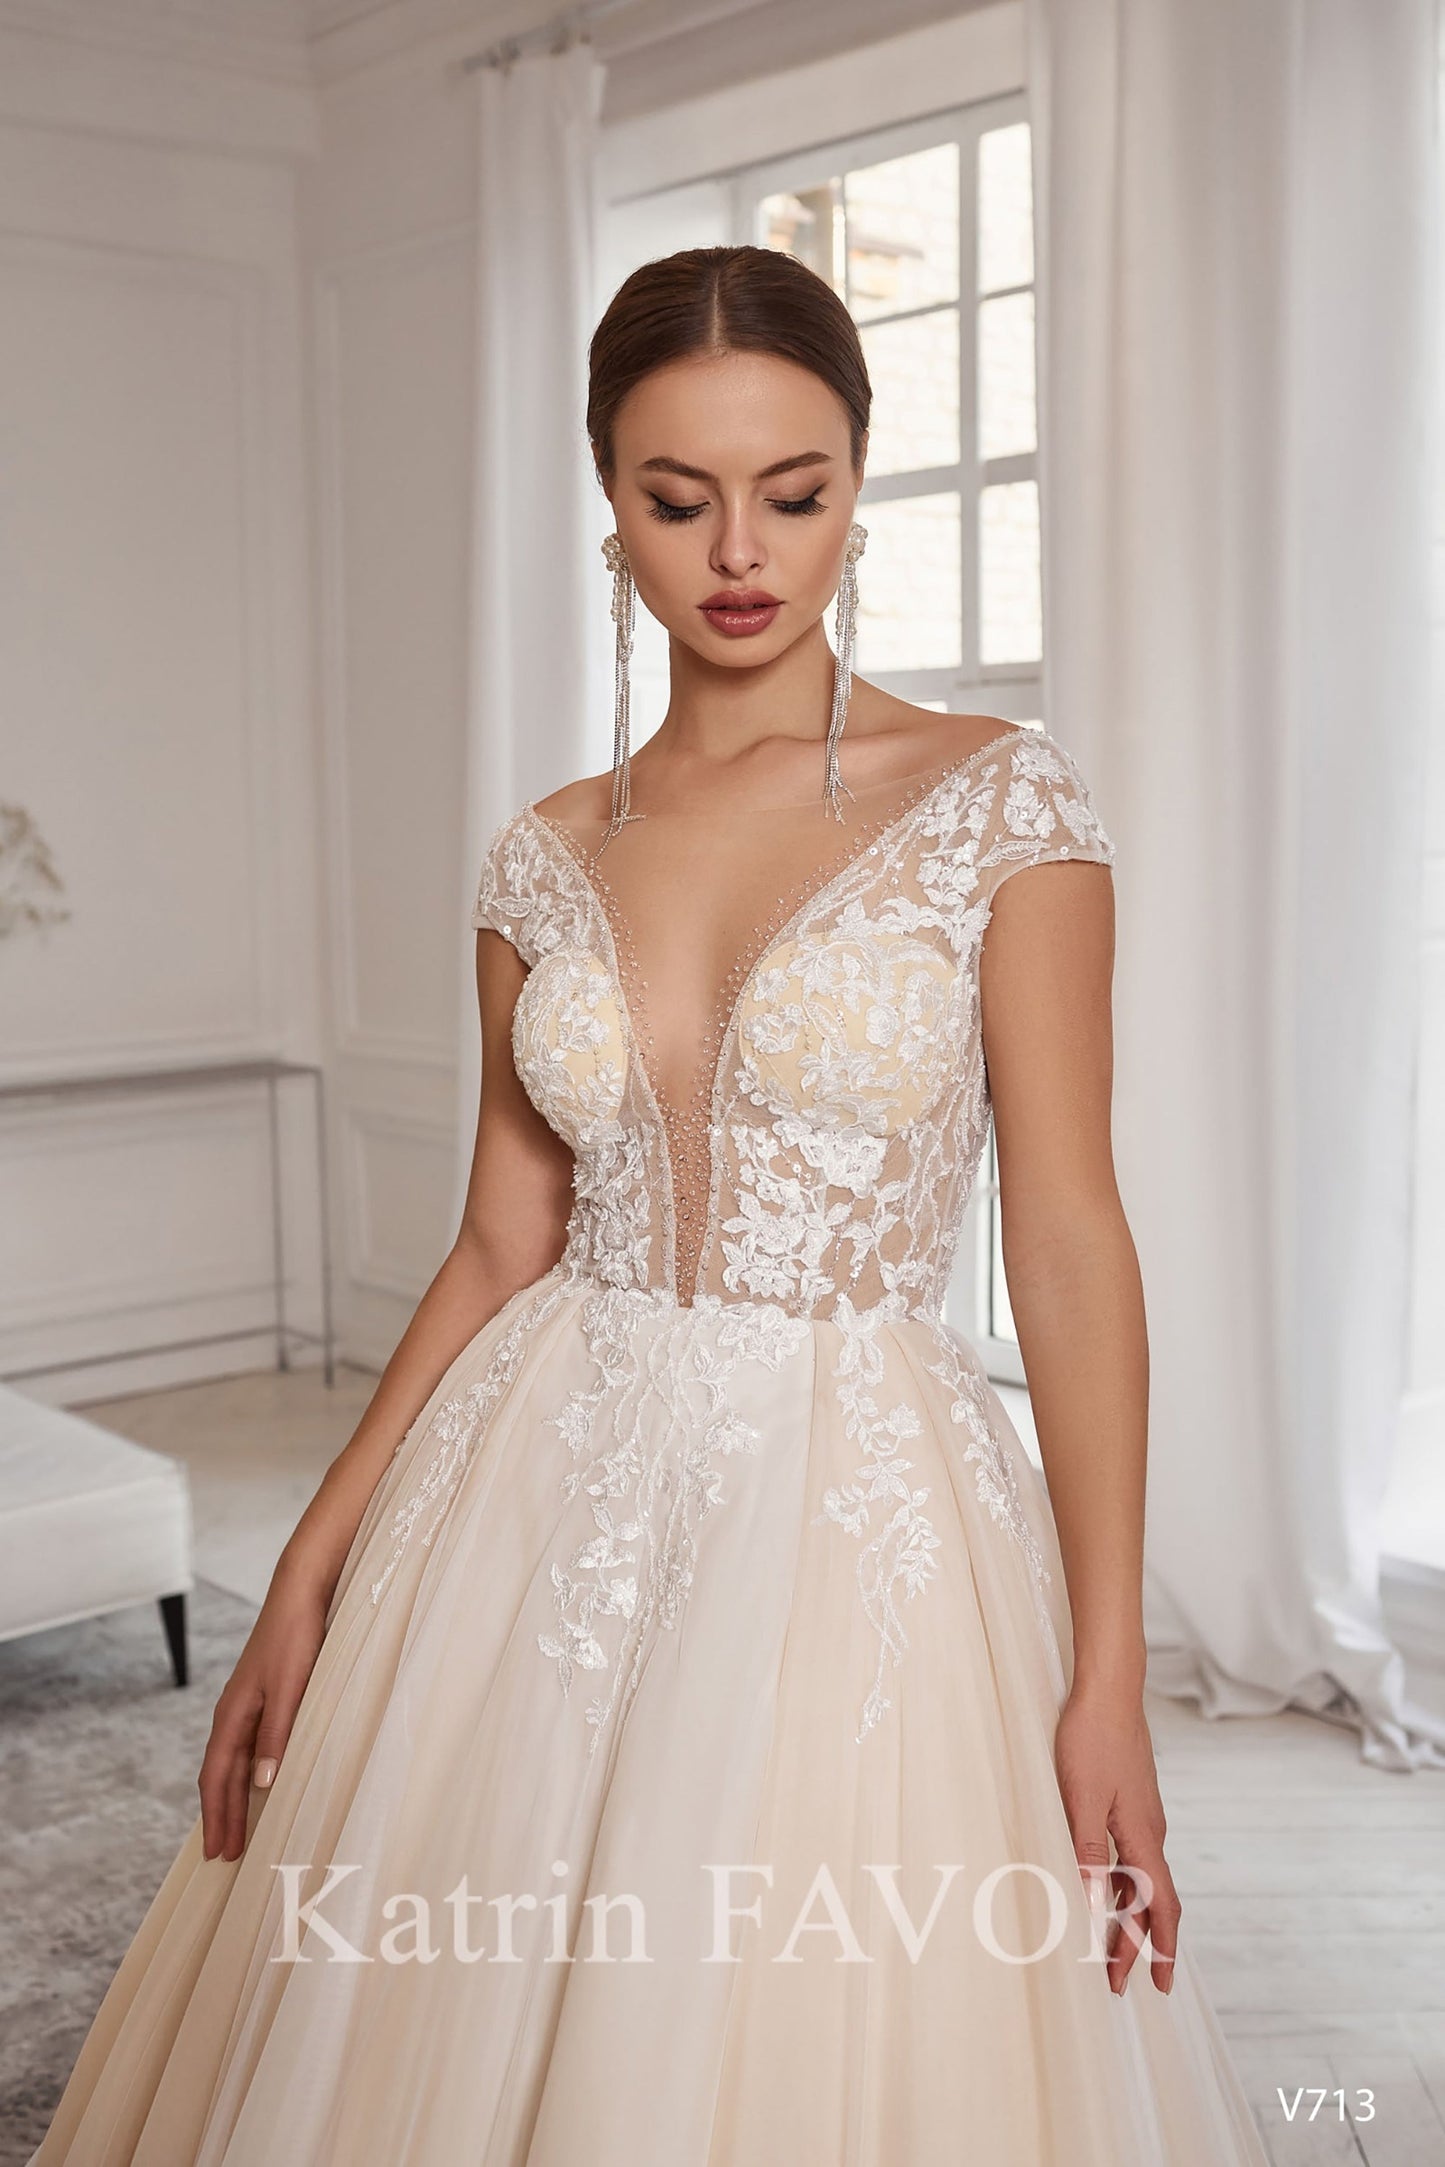 KatrinFAVORboutique-Blush tulle embroidered wedding gown